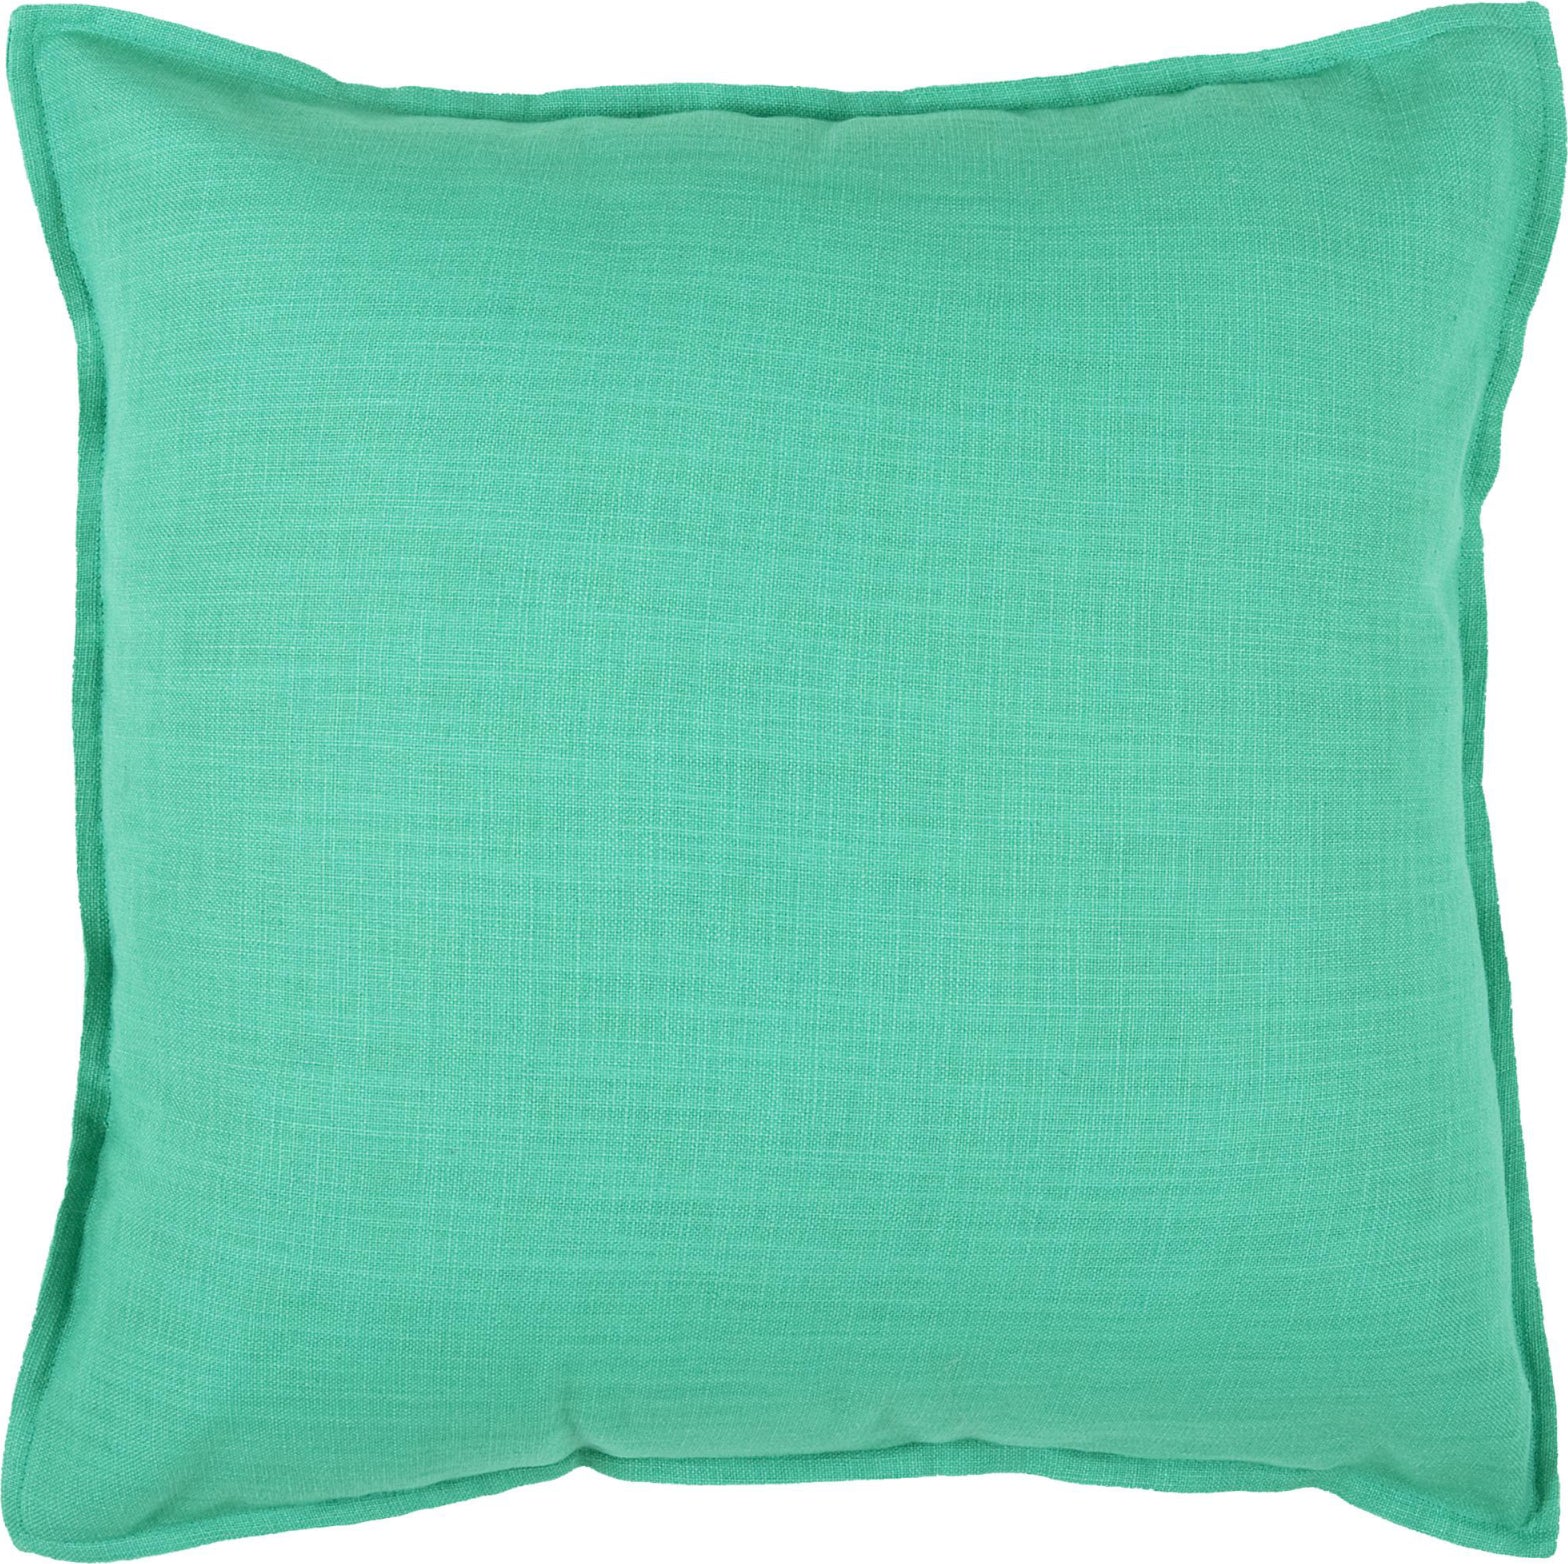 Rizzy Pillows T03714 Turquoise